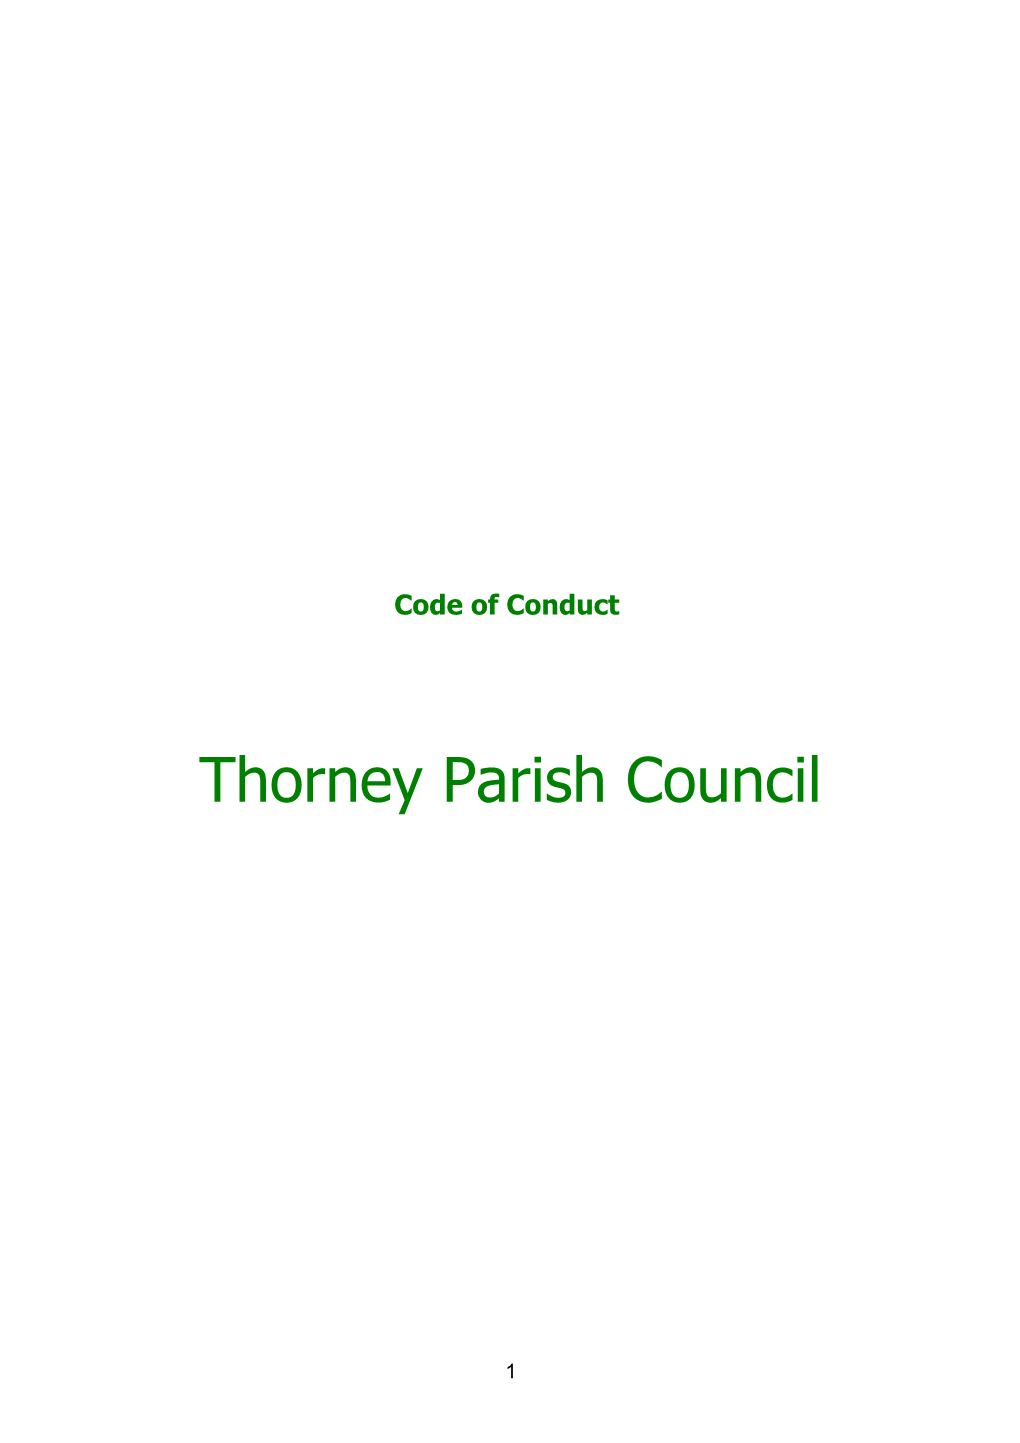 Code of Conduct of Cambridgeshire County Council